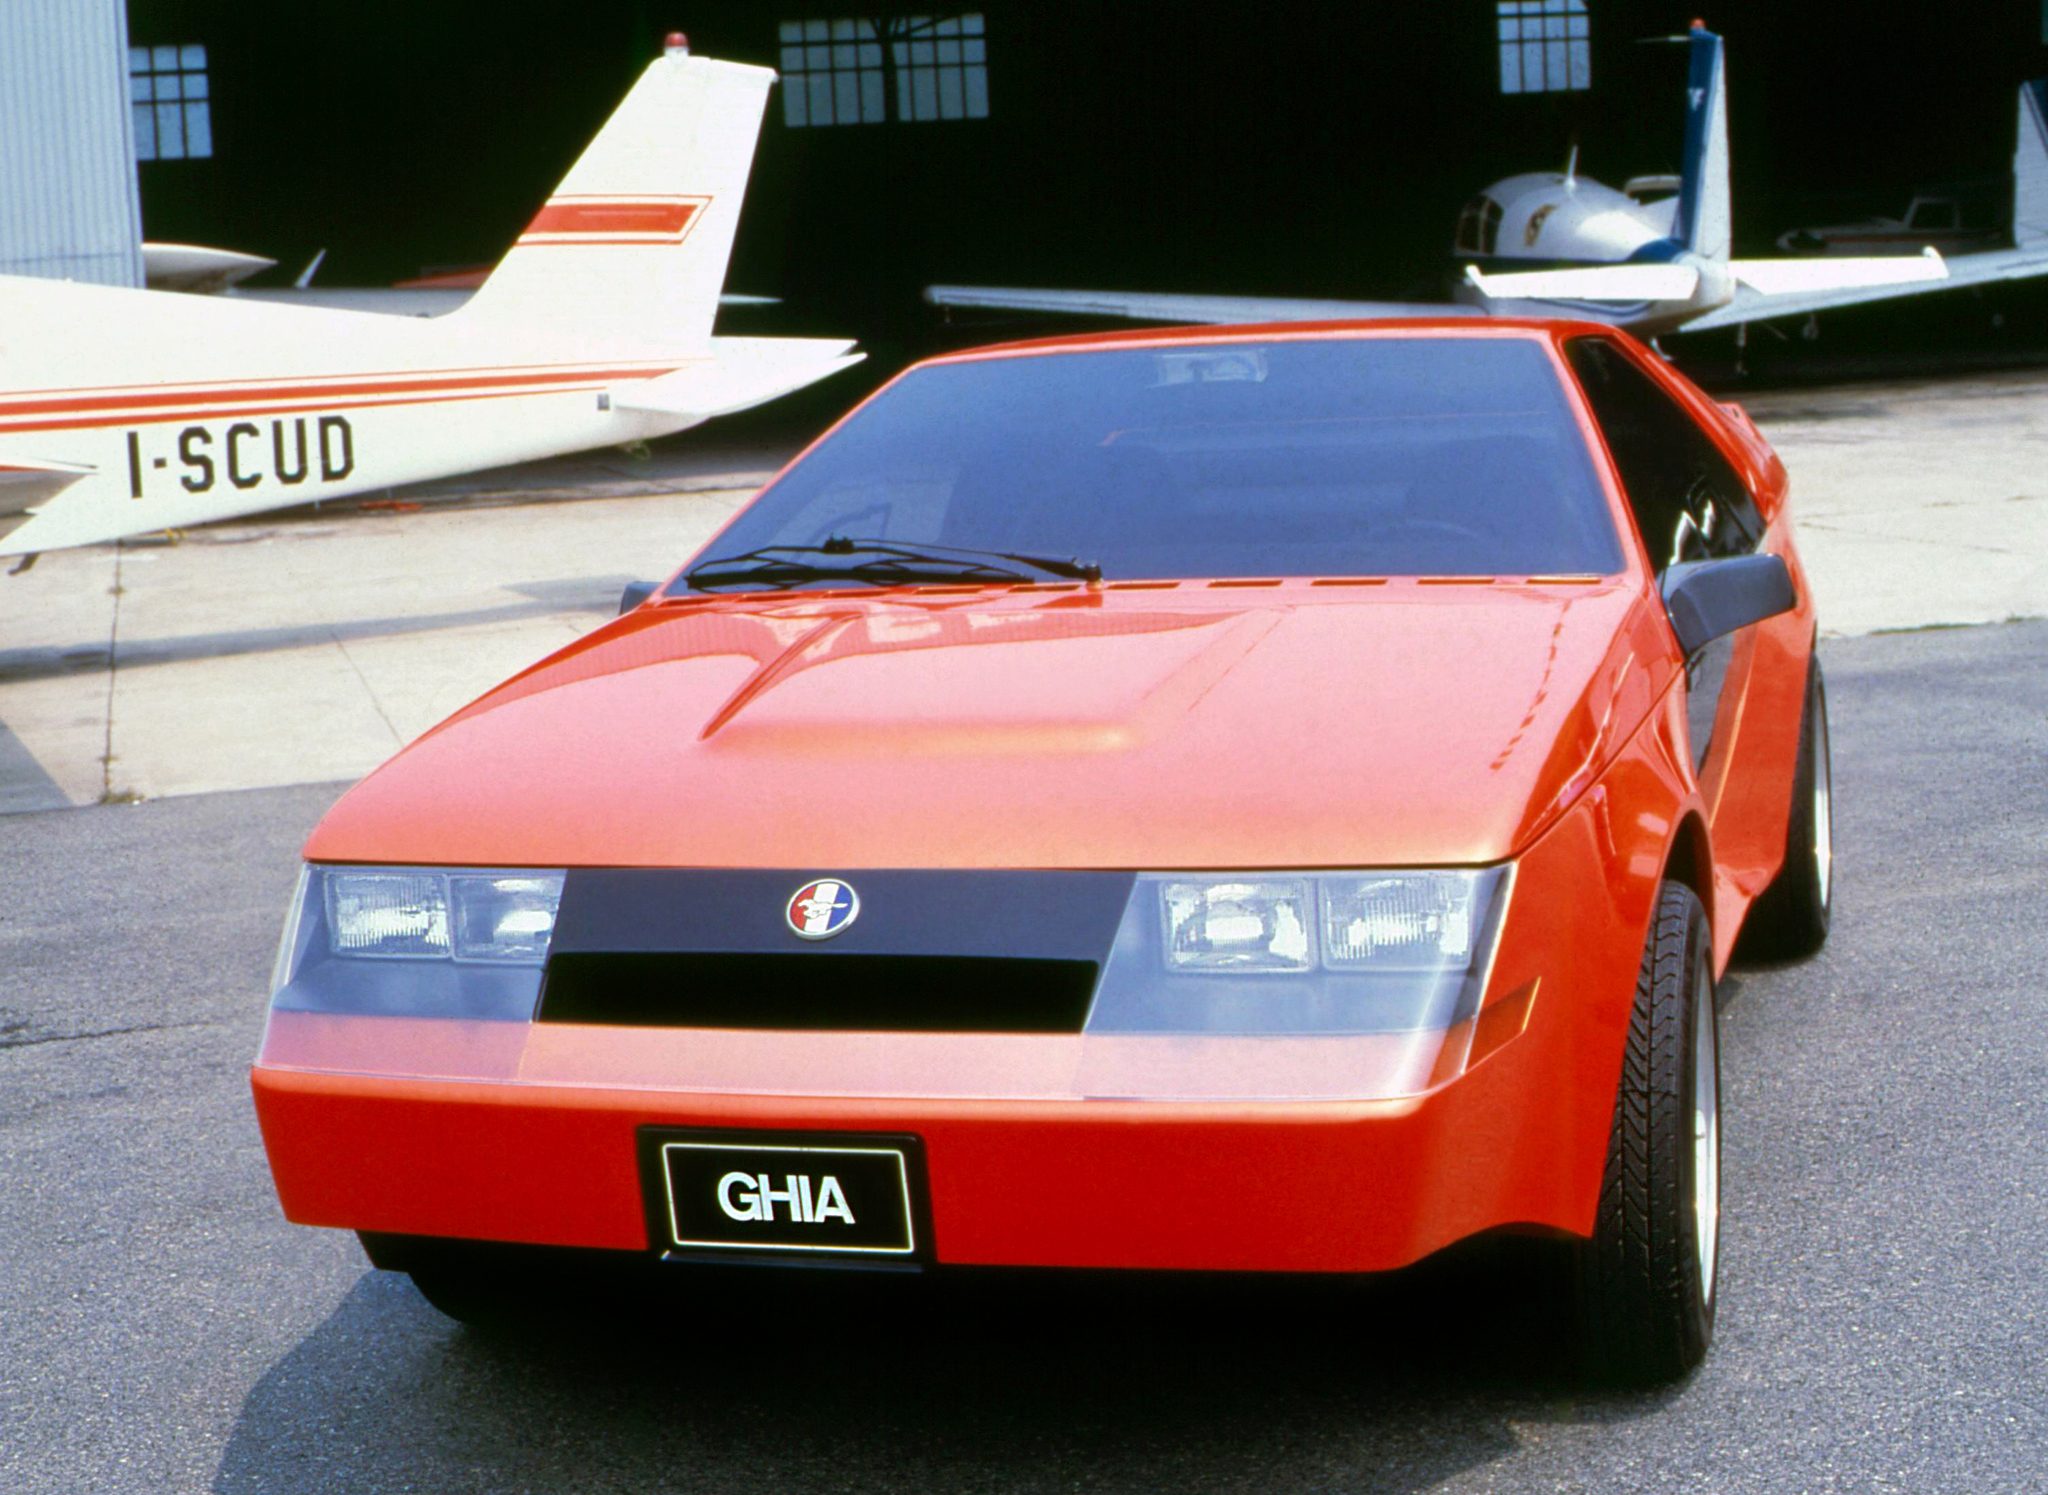 Mustang Of The Day: 1980 Mustang RSX Concept